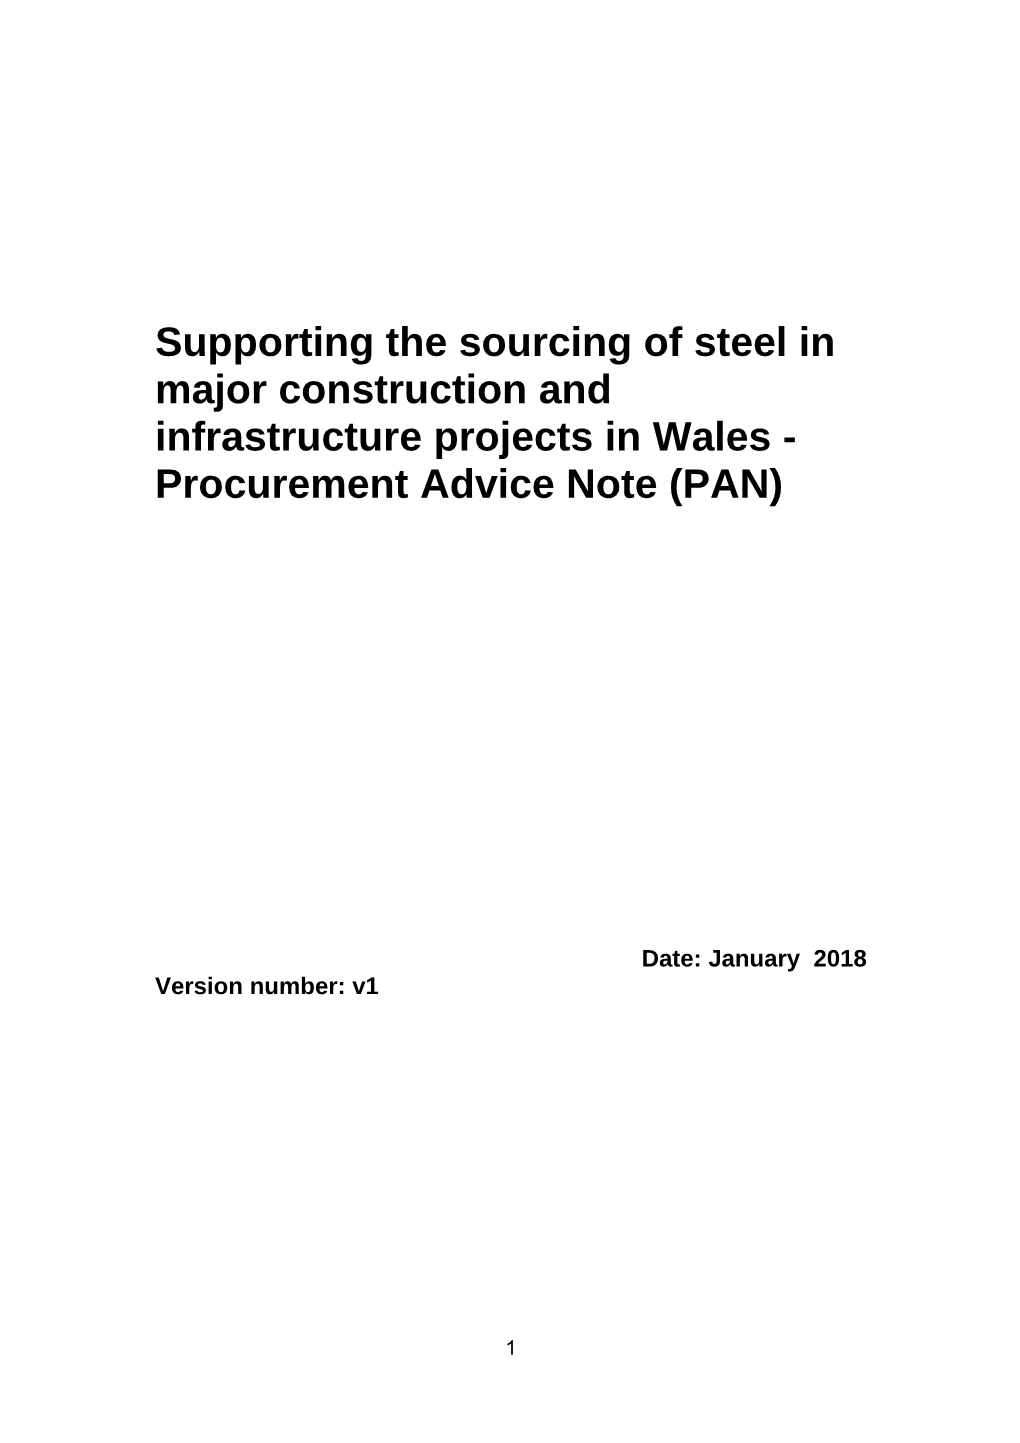 Supporting the Sourcing of Steel in Major Construction and Infrastructure Projects in Wales